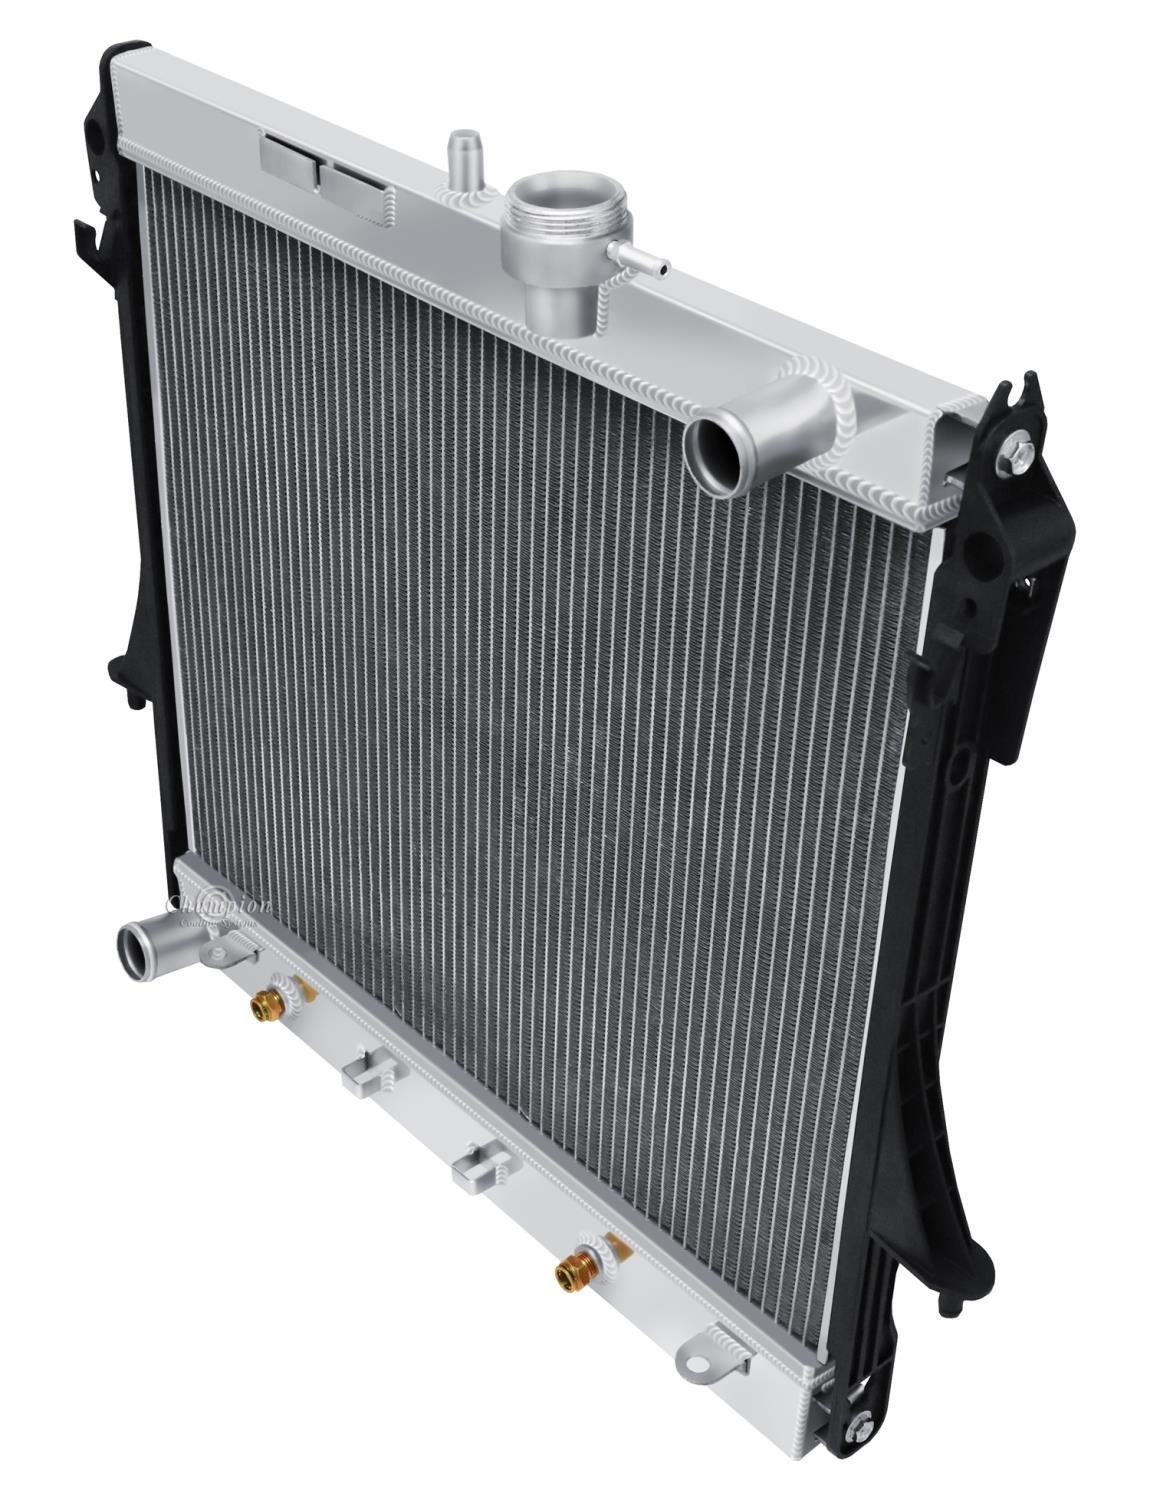 CR2857-3 All-Aluminum Radiator for Select 2006-2010 GM Trucks With 6.6L V8 Duramax Engine